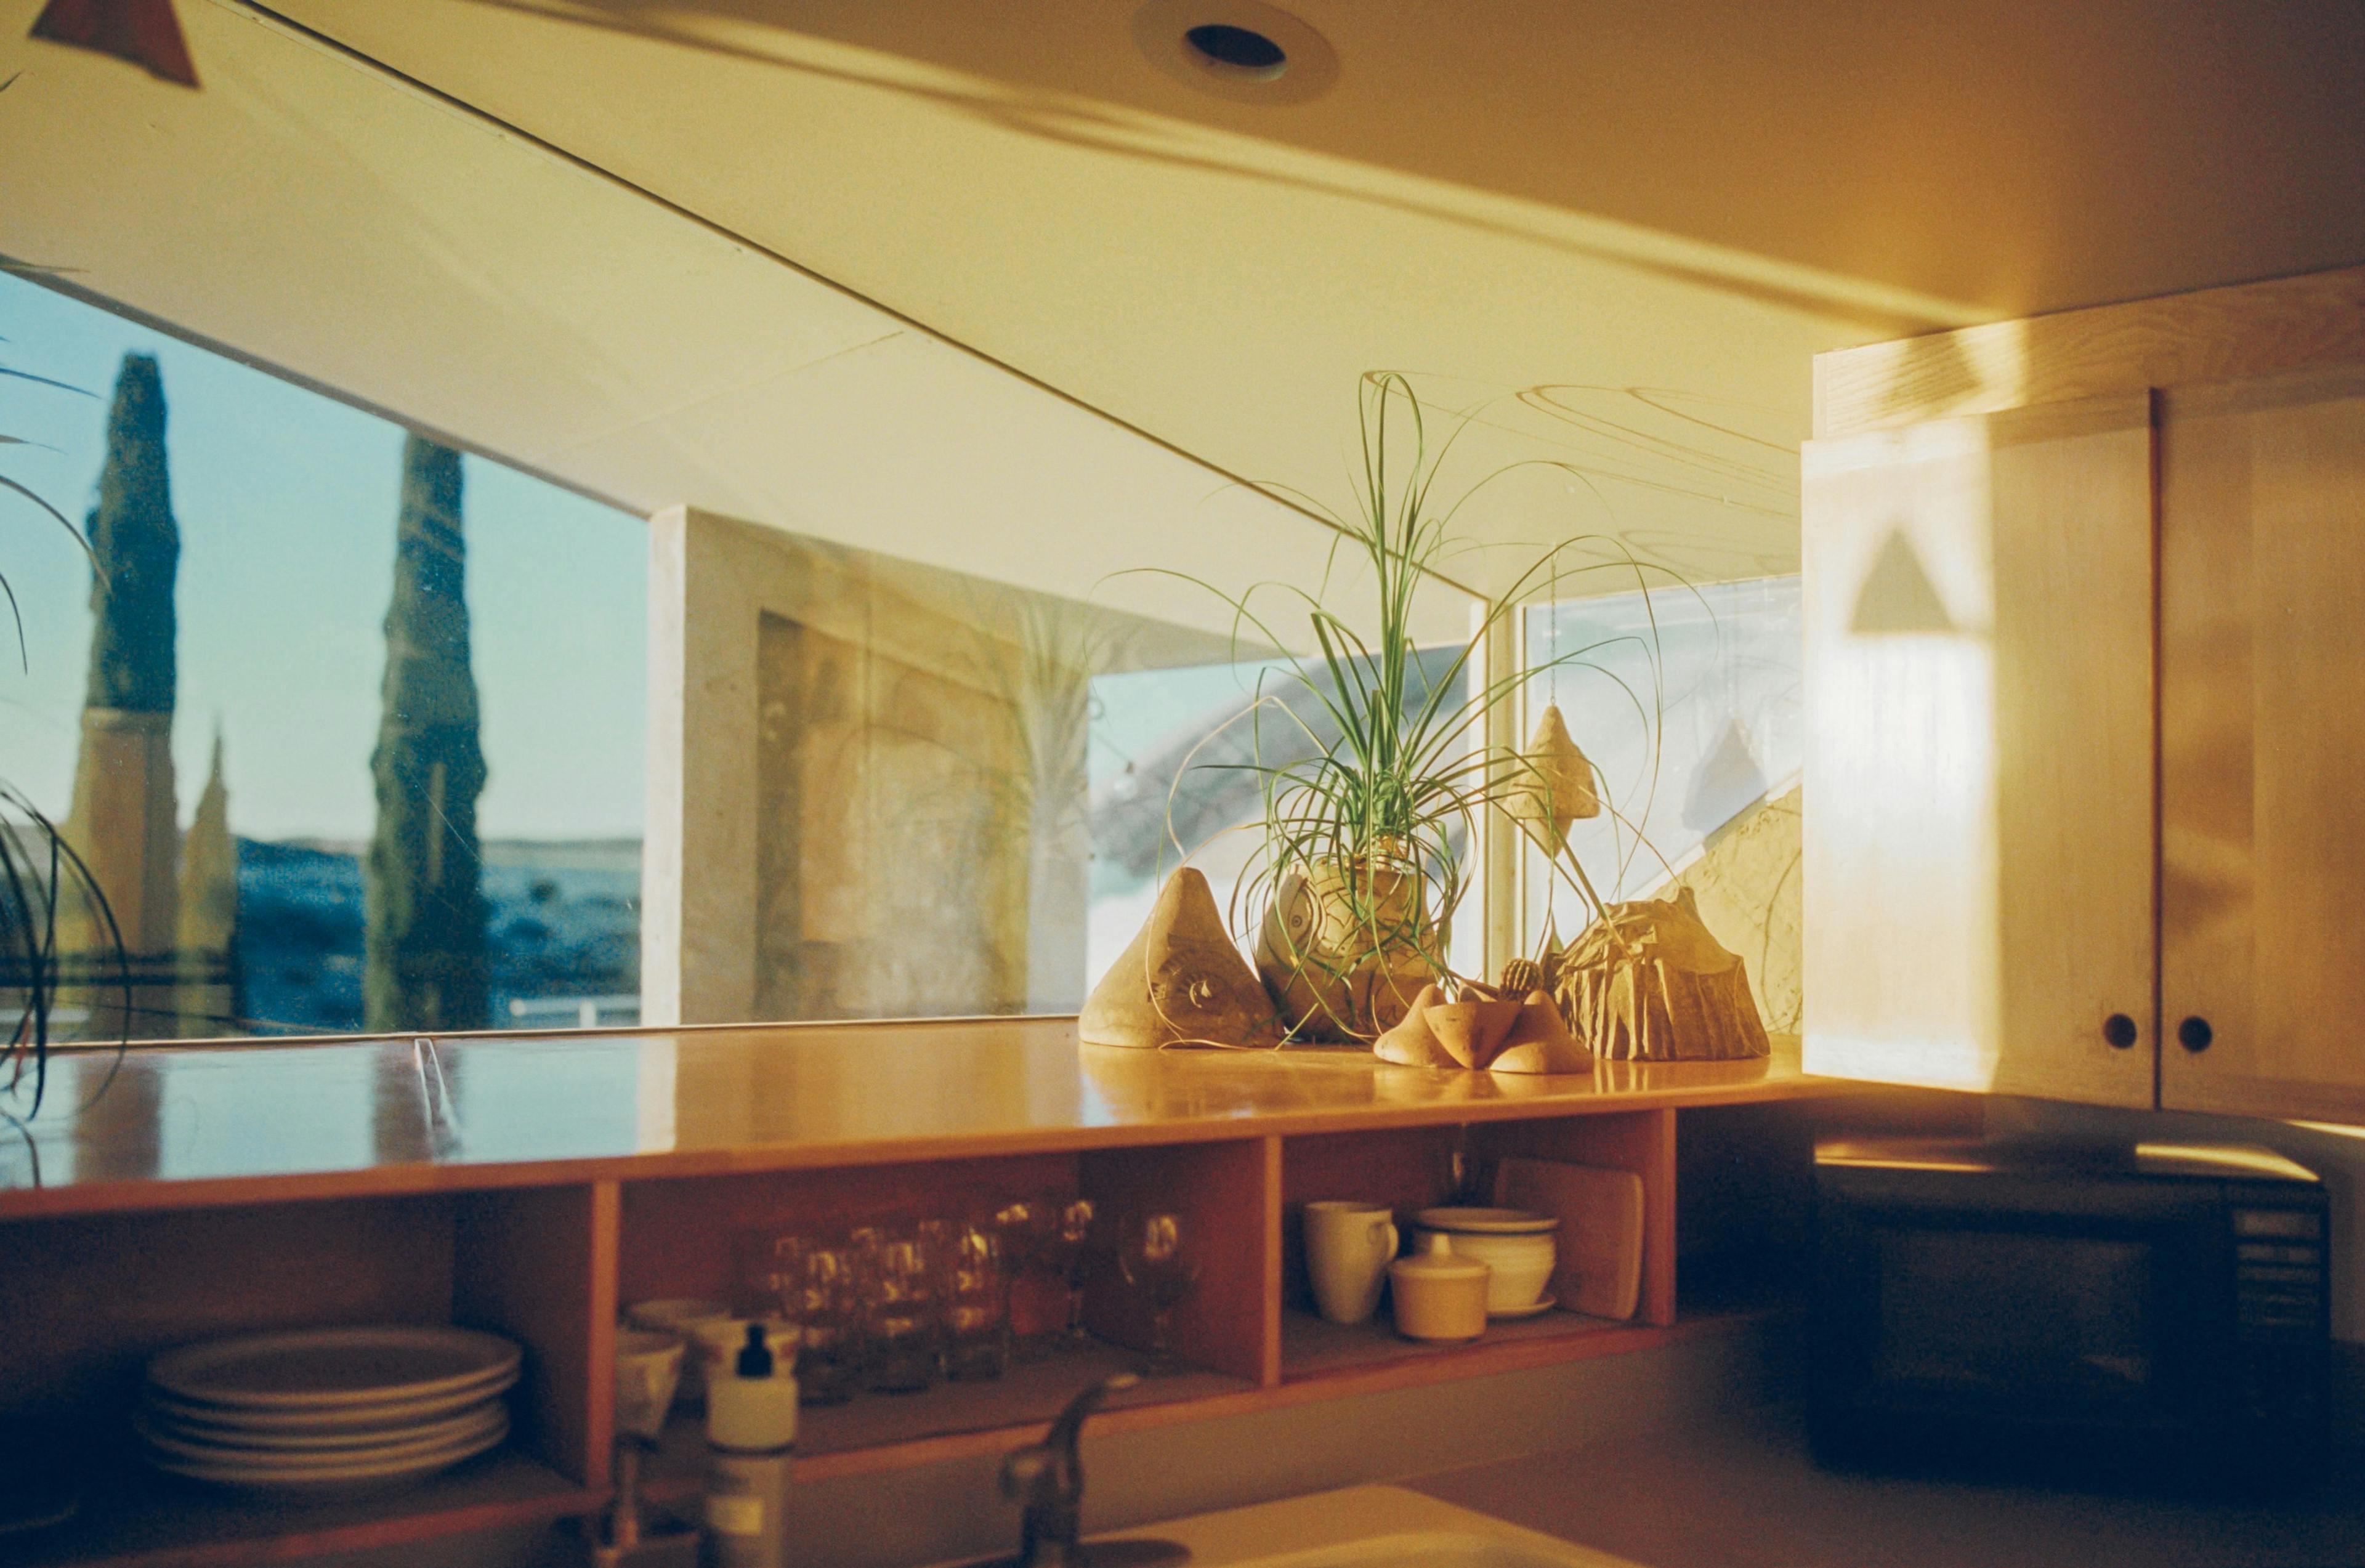 Arcosanti suite captured on film by Natalie Carrasco